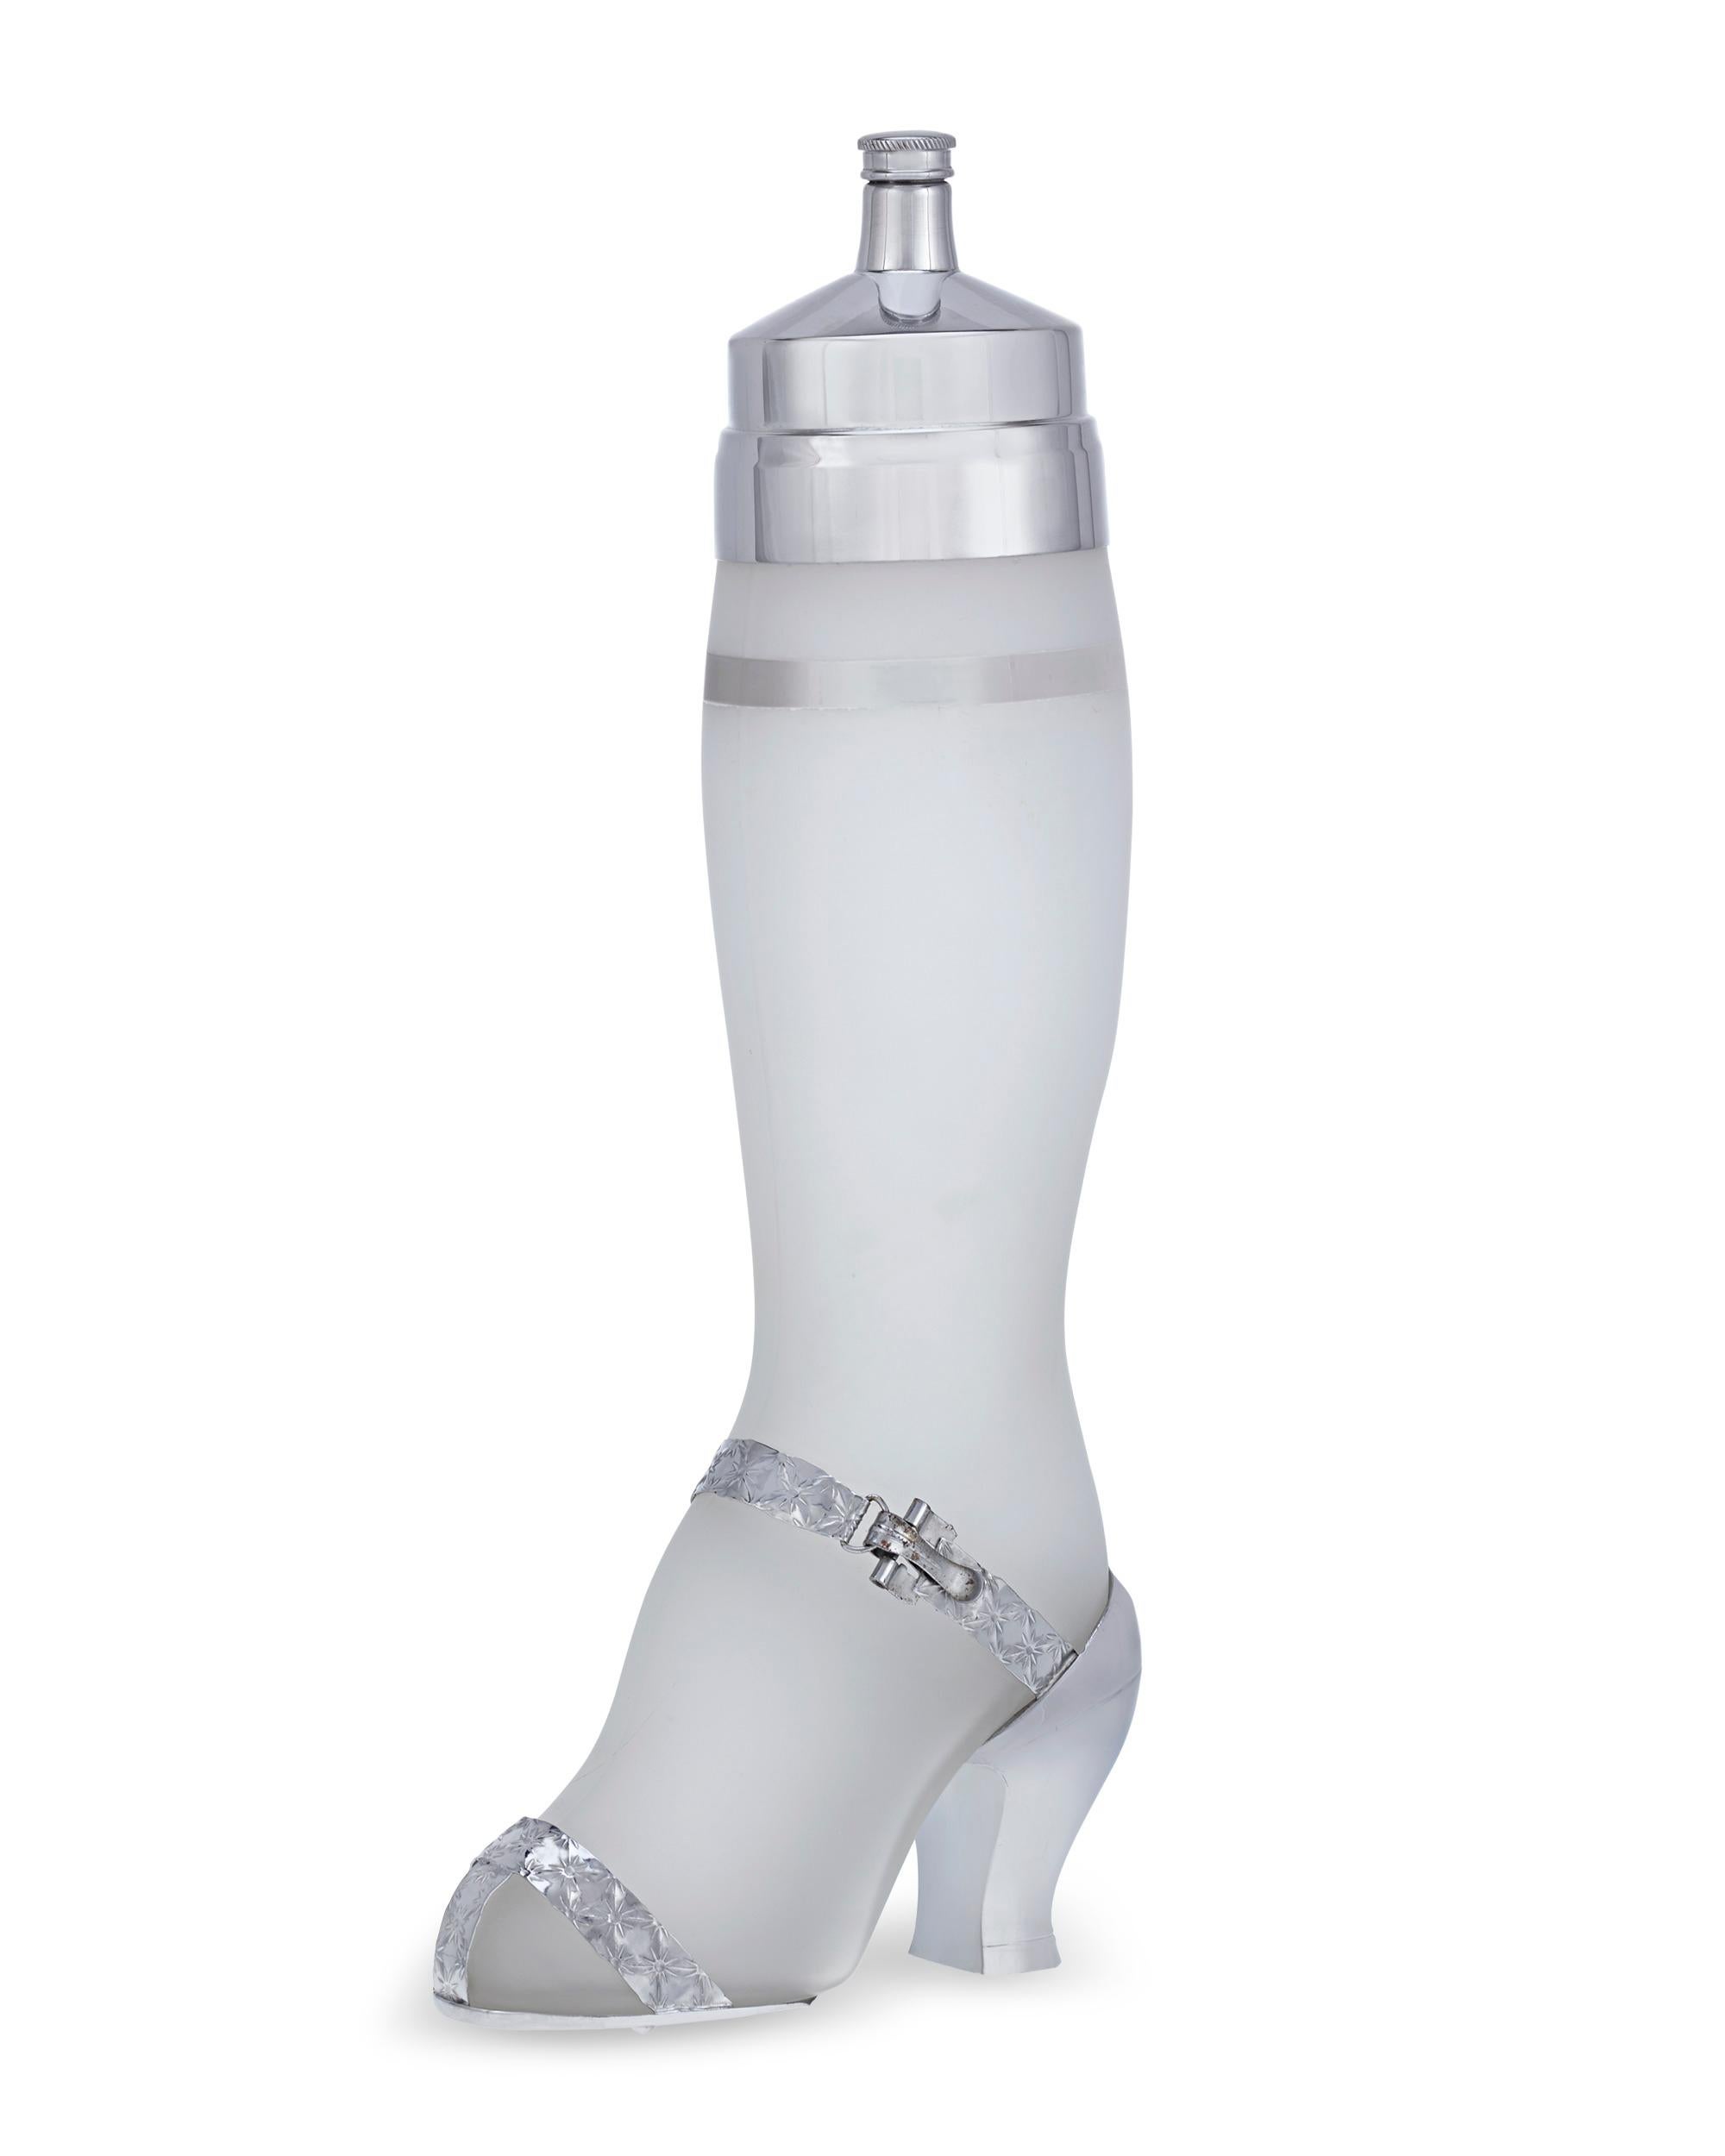 Art Deco Frosted Glass Lady’s Leg Cocktail Shaker and Glasses